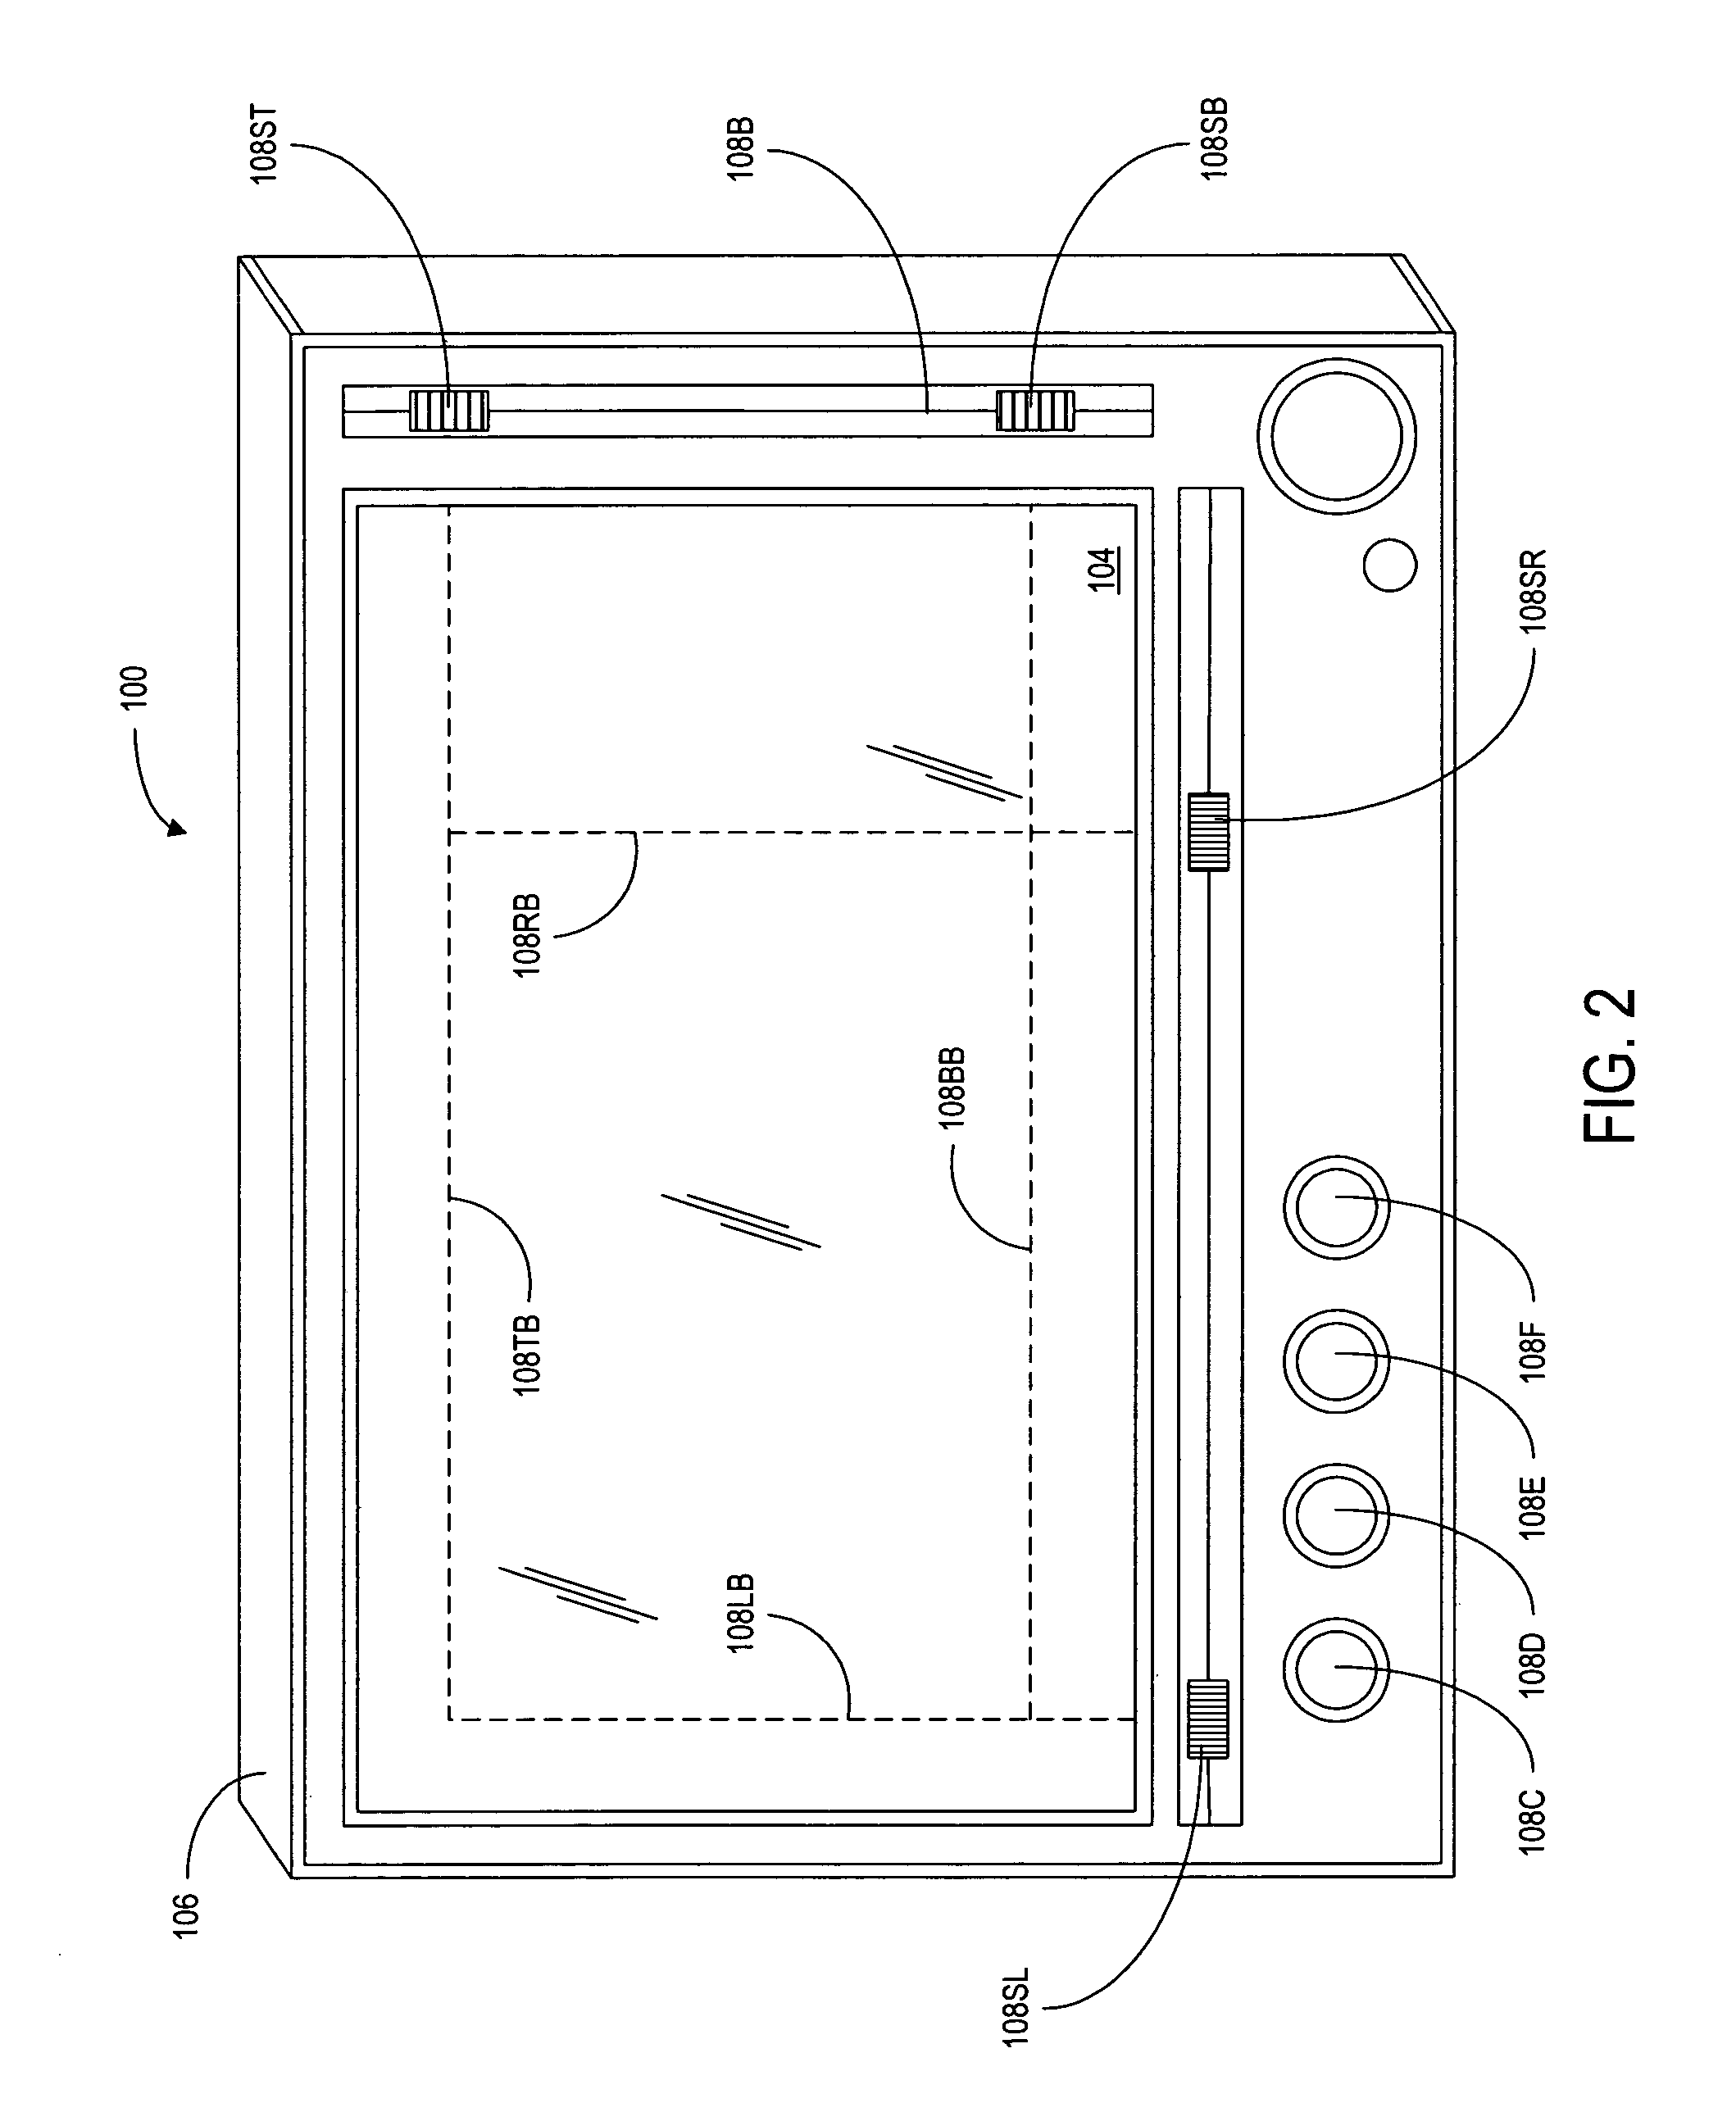 Digital picture frame and method for editing